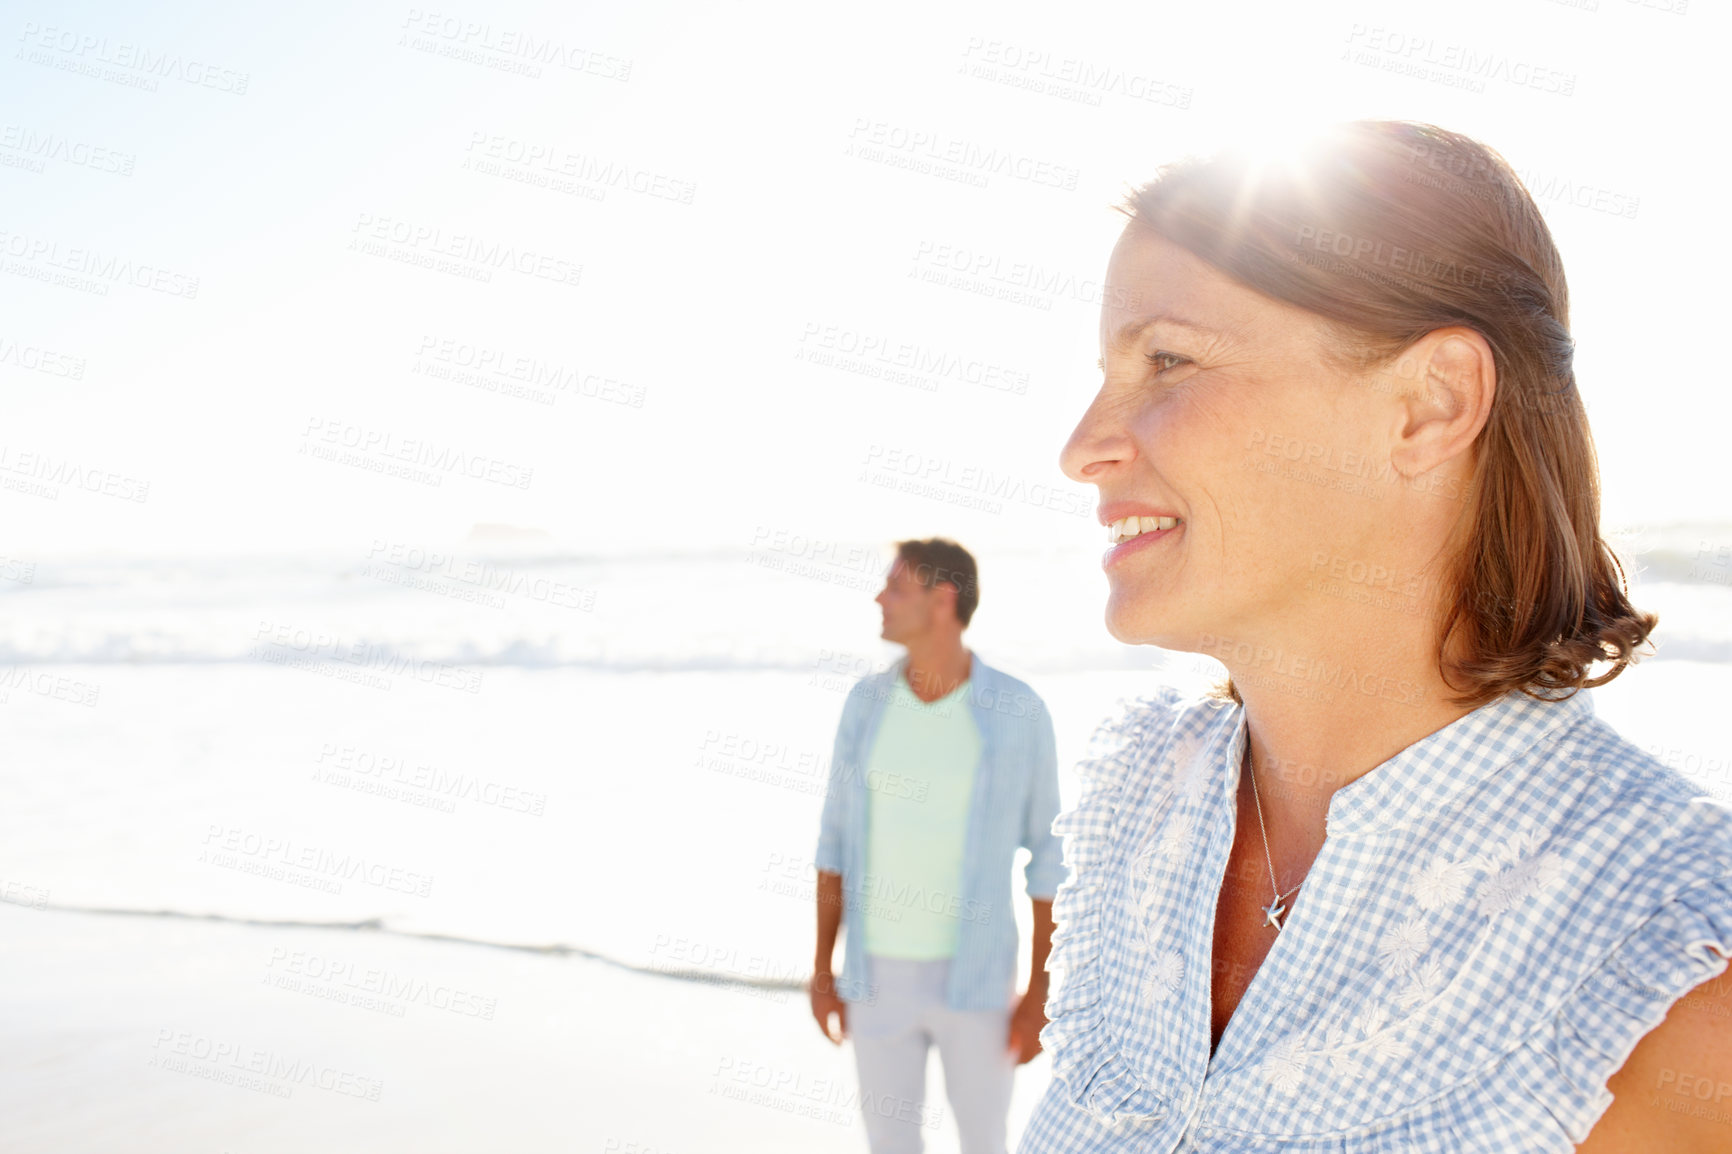 Buy stock photo A mature woman looking away while enjoying a day on the beach with her husband